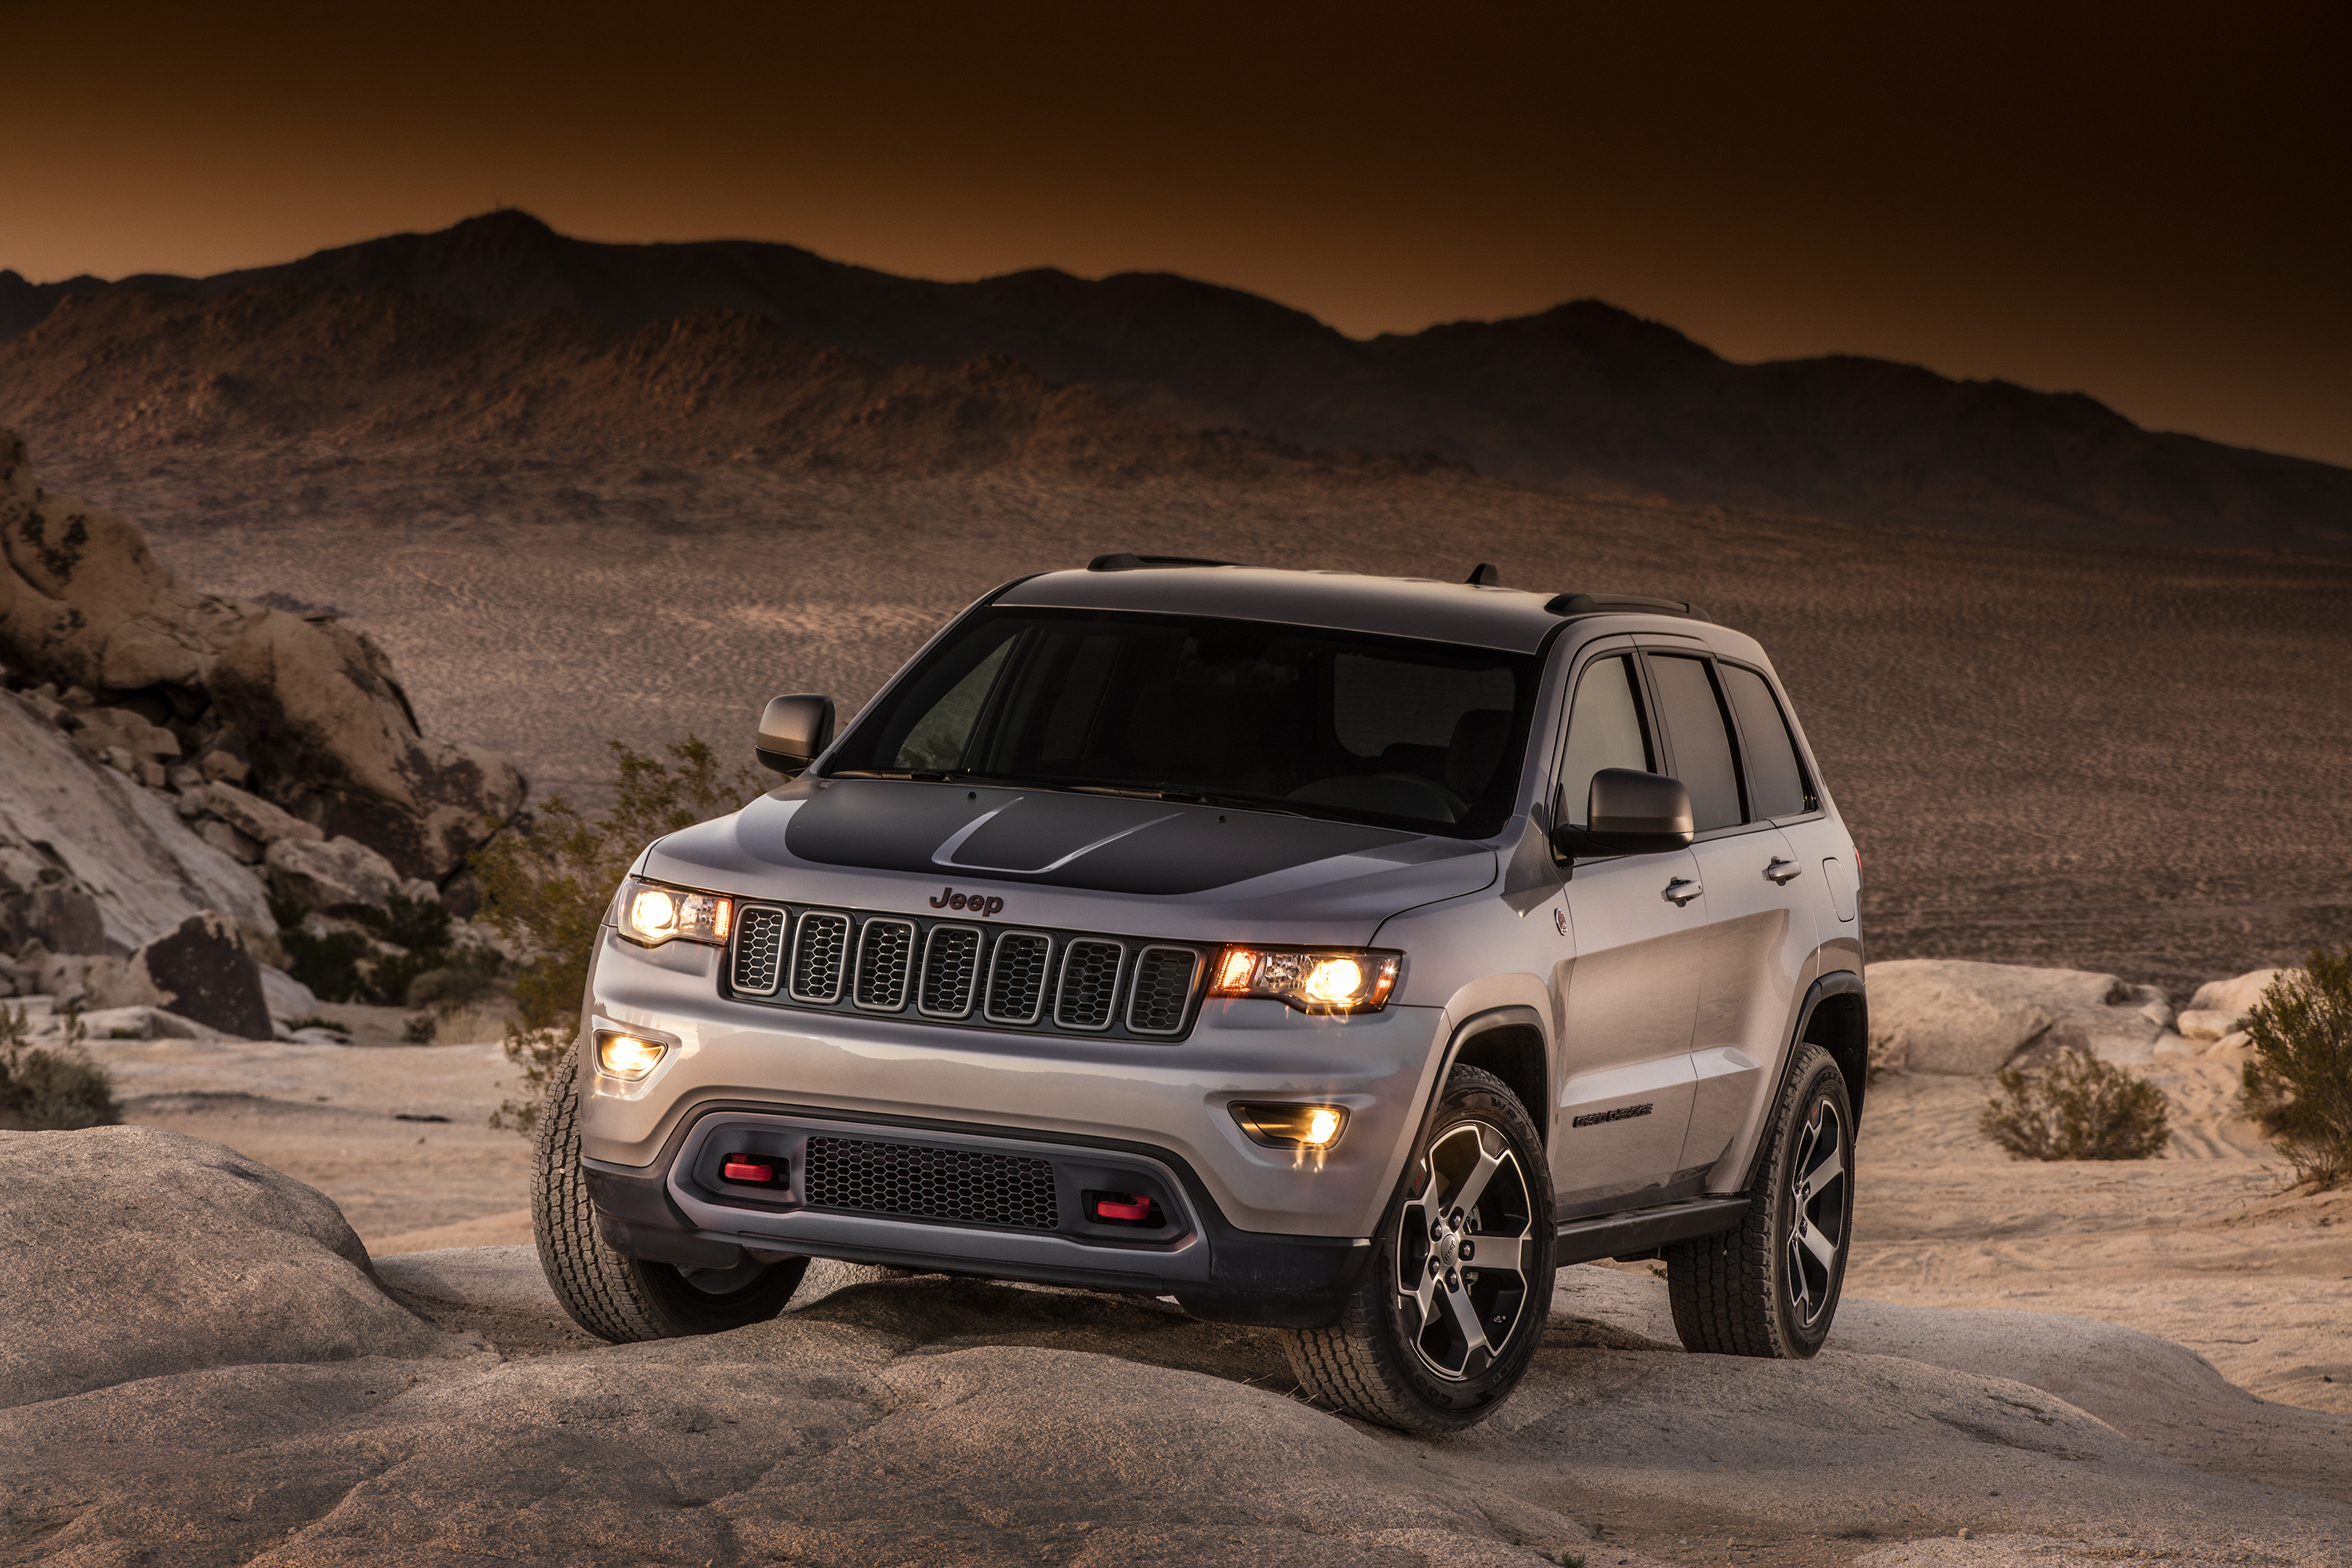 Jeep Grand Cherokee Vertical Background